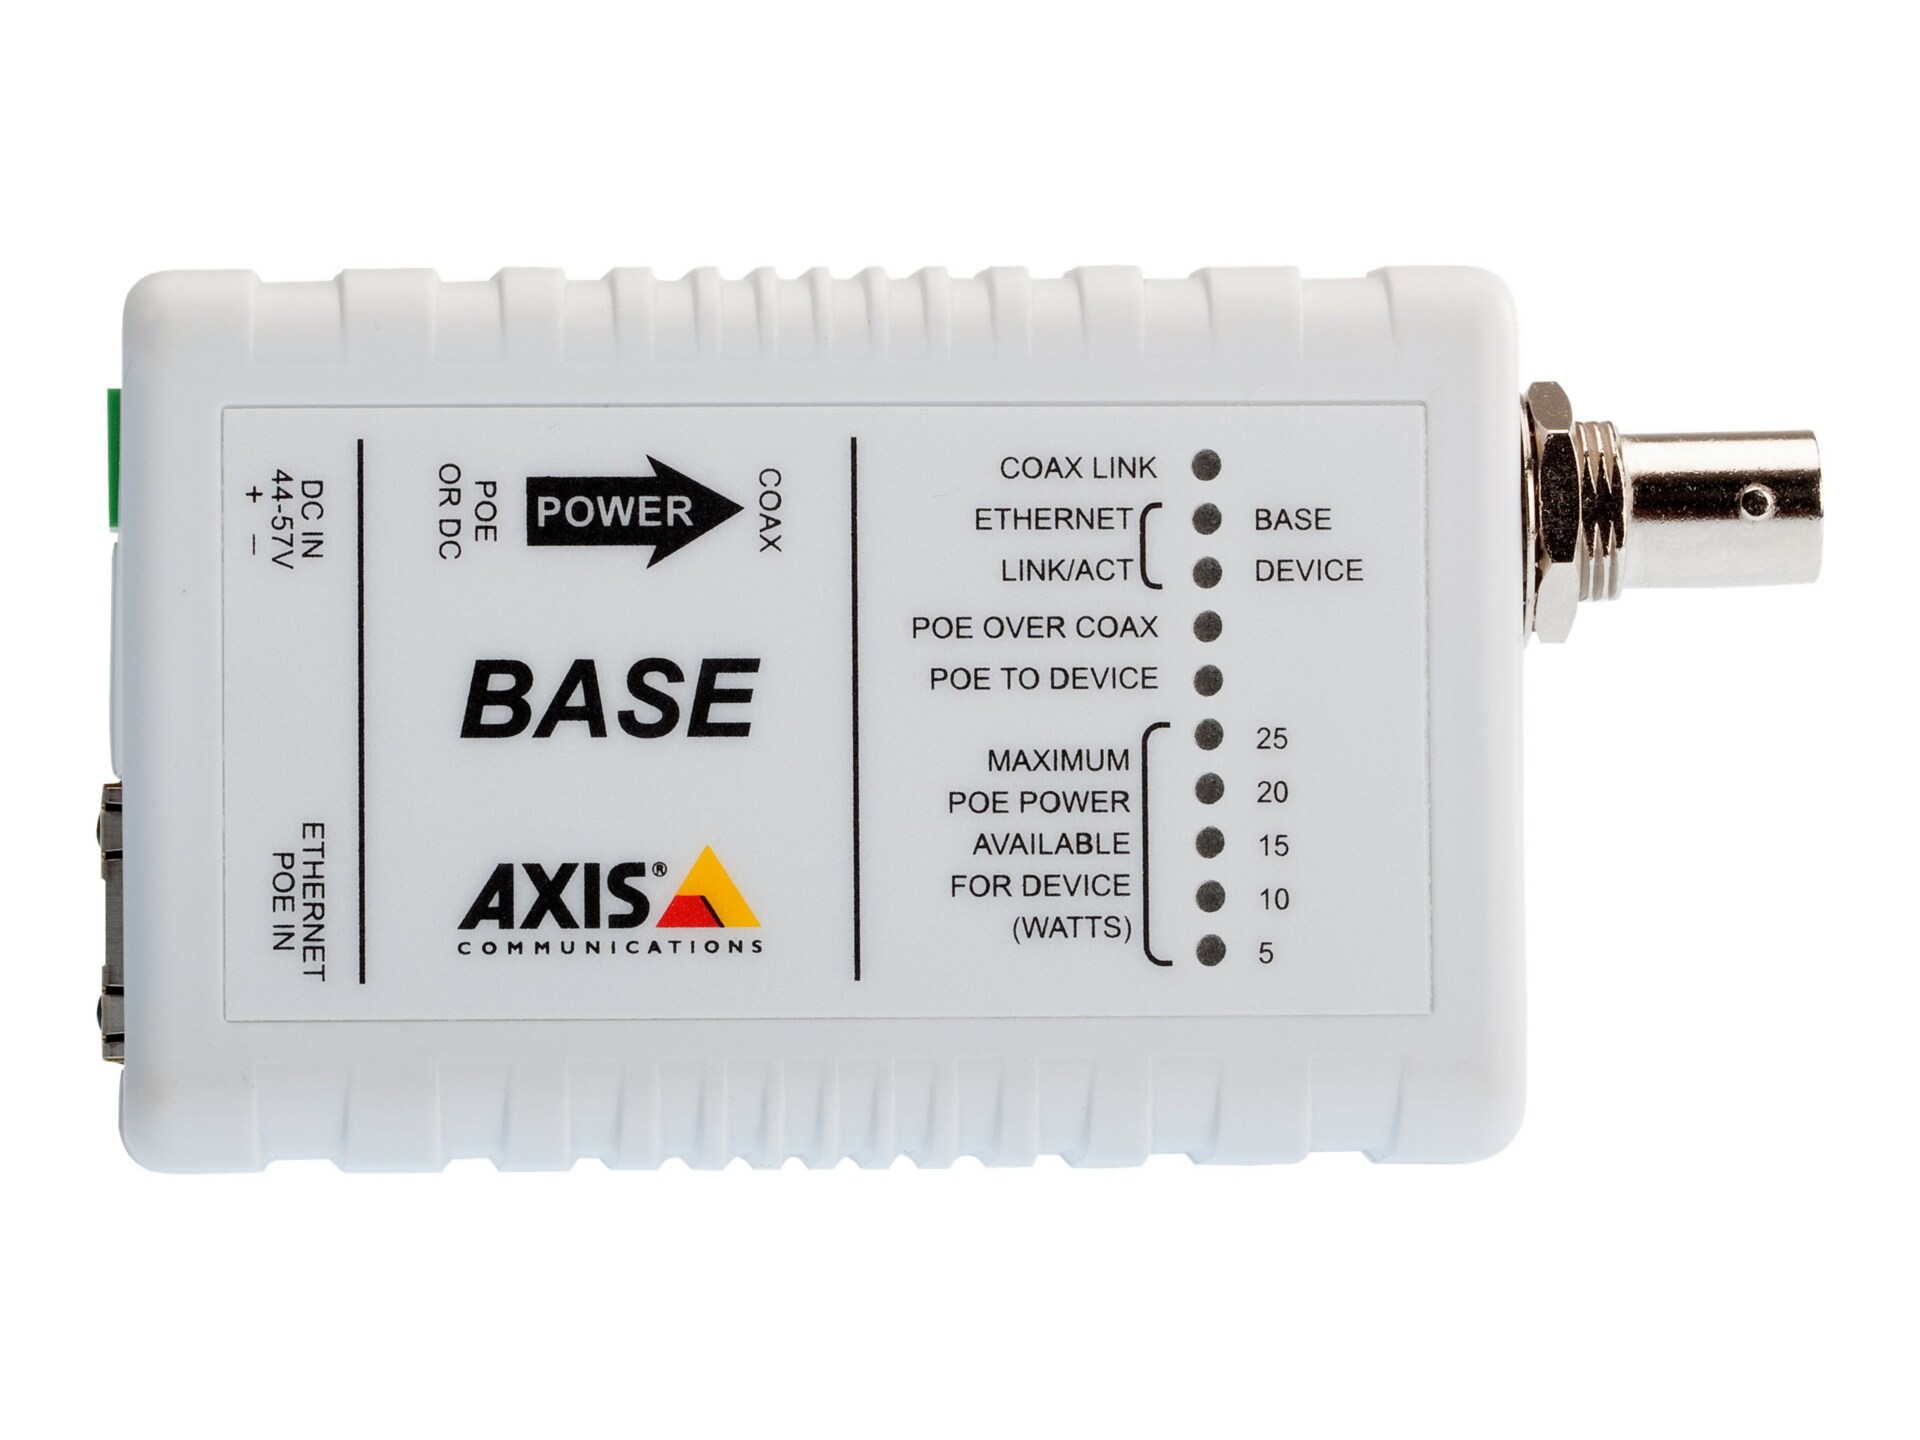 AXIS T8641 POE+OVER COAX BASE UNIT